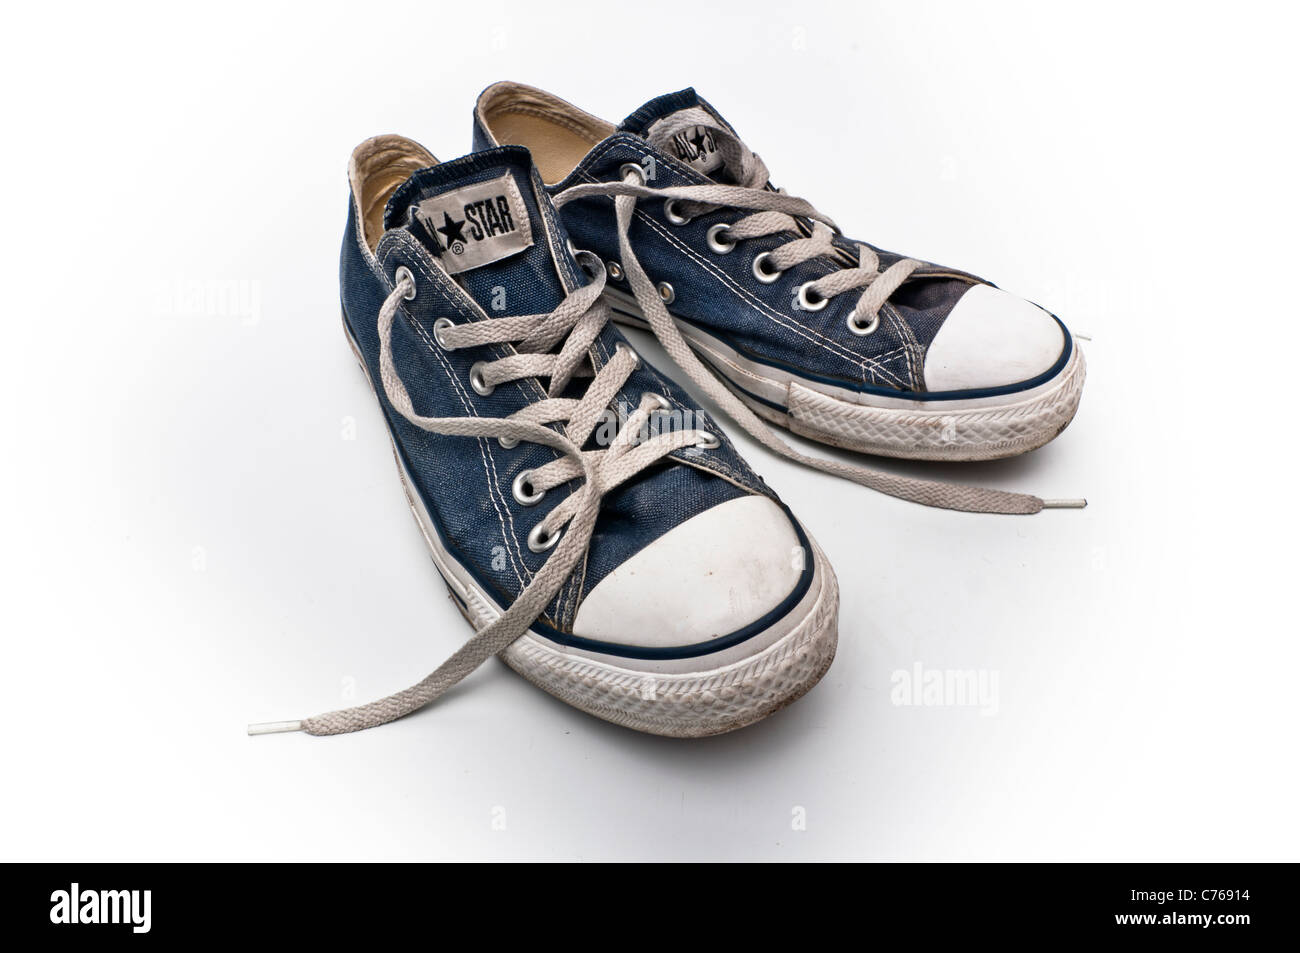 Converse Chuck Taylor One Star sneakers Stock Photo - Alamy